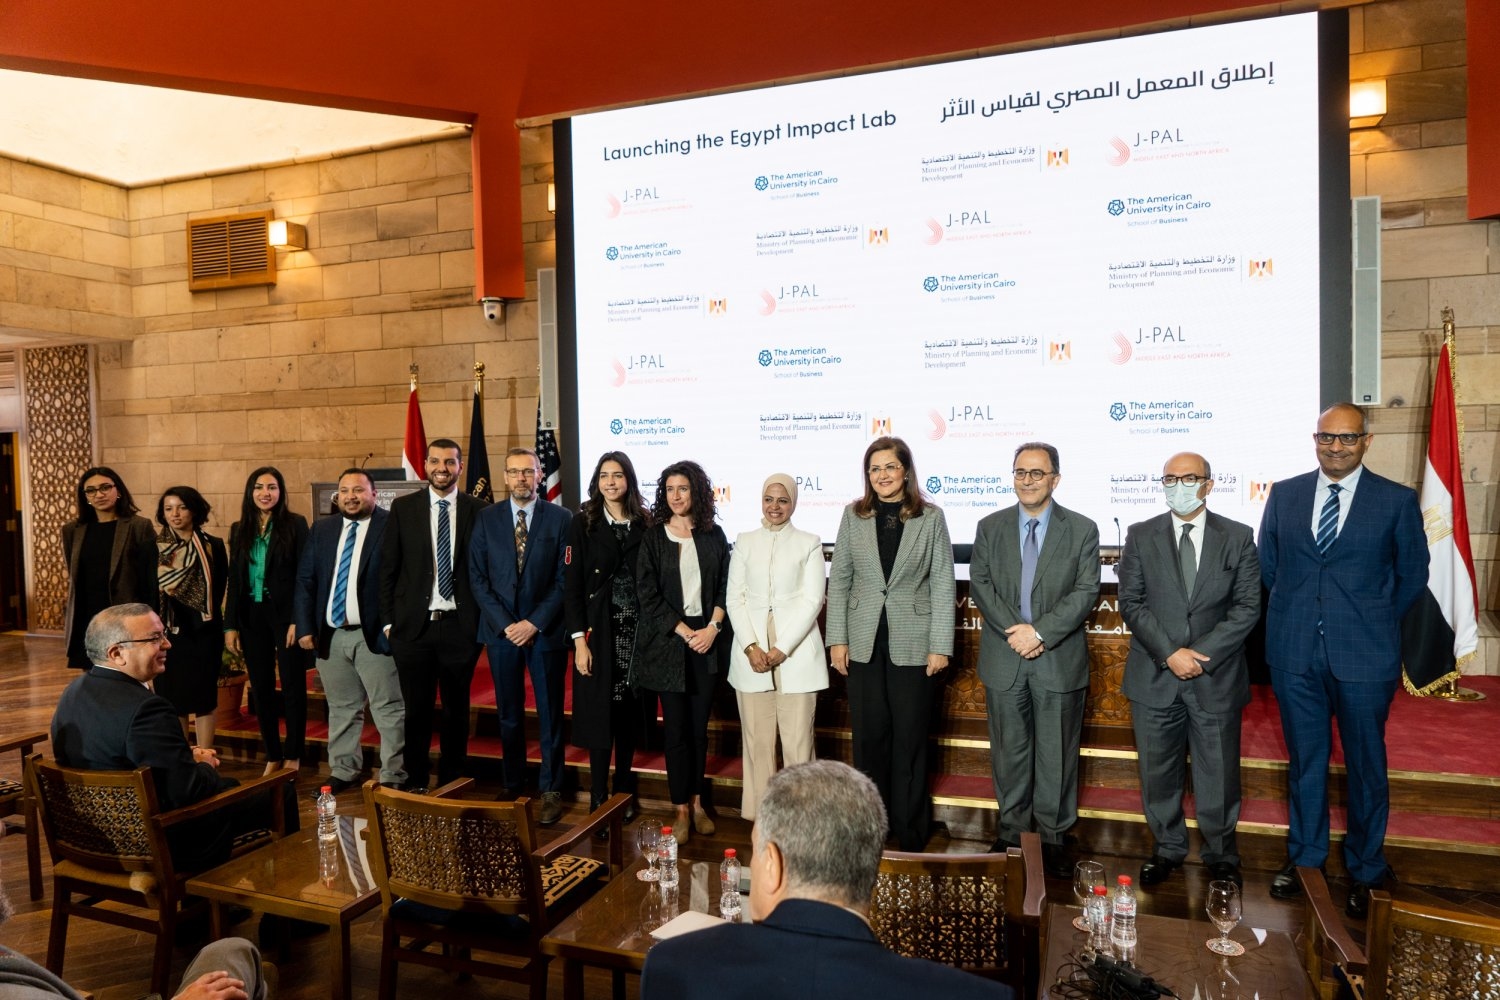 J-PAL launches the Egypt Impact Lab to improve lives through evidence-informed policymaking